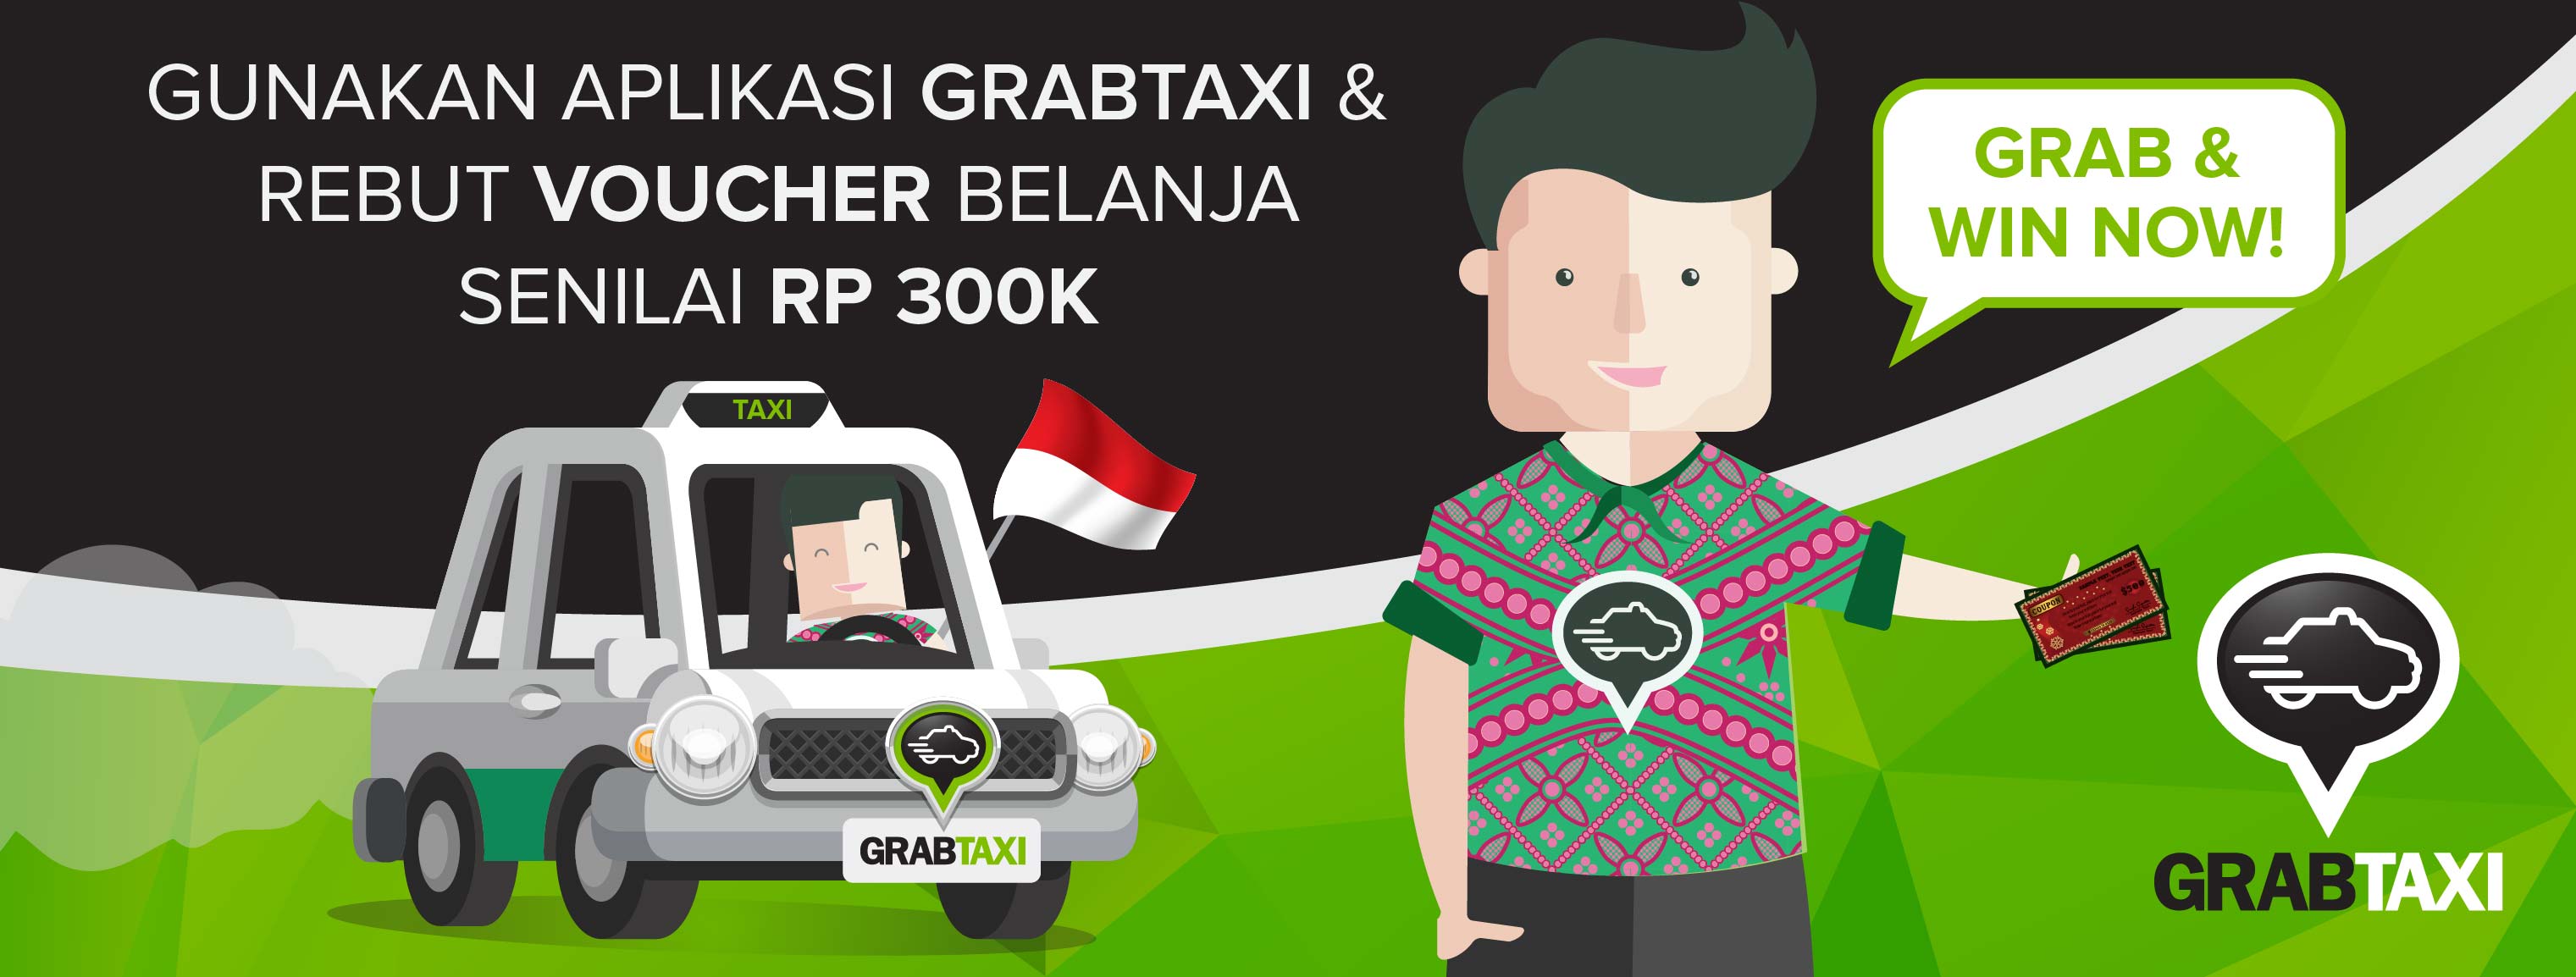 GrabTaxi_IndonesiaLaunch_CampaignPageVisual_Contest